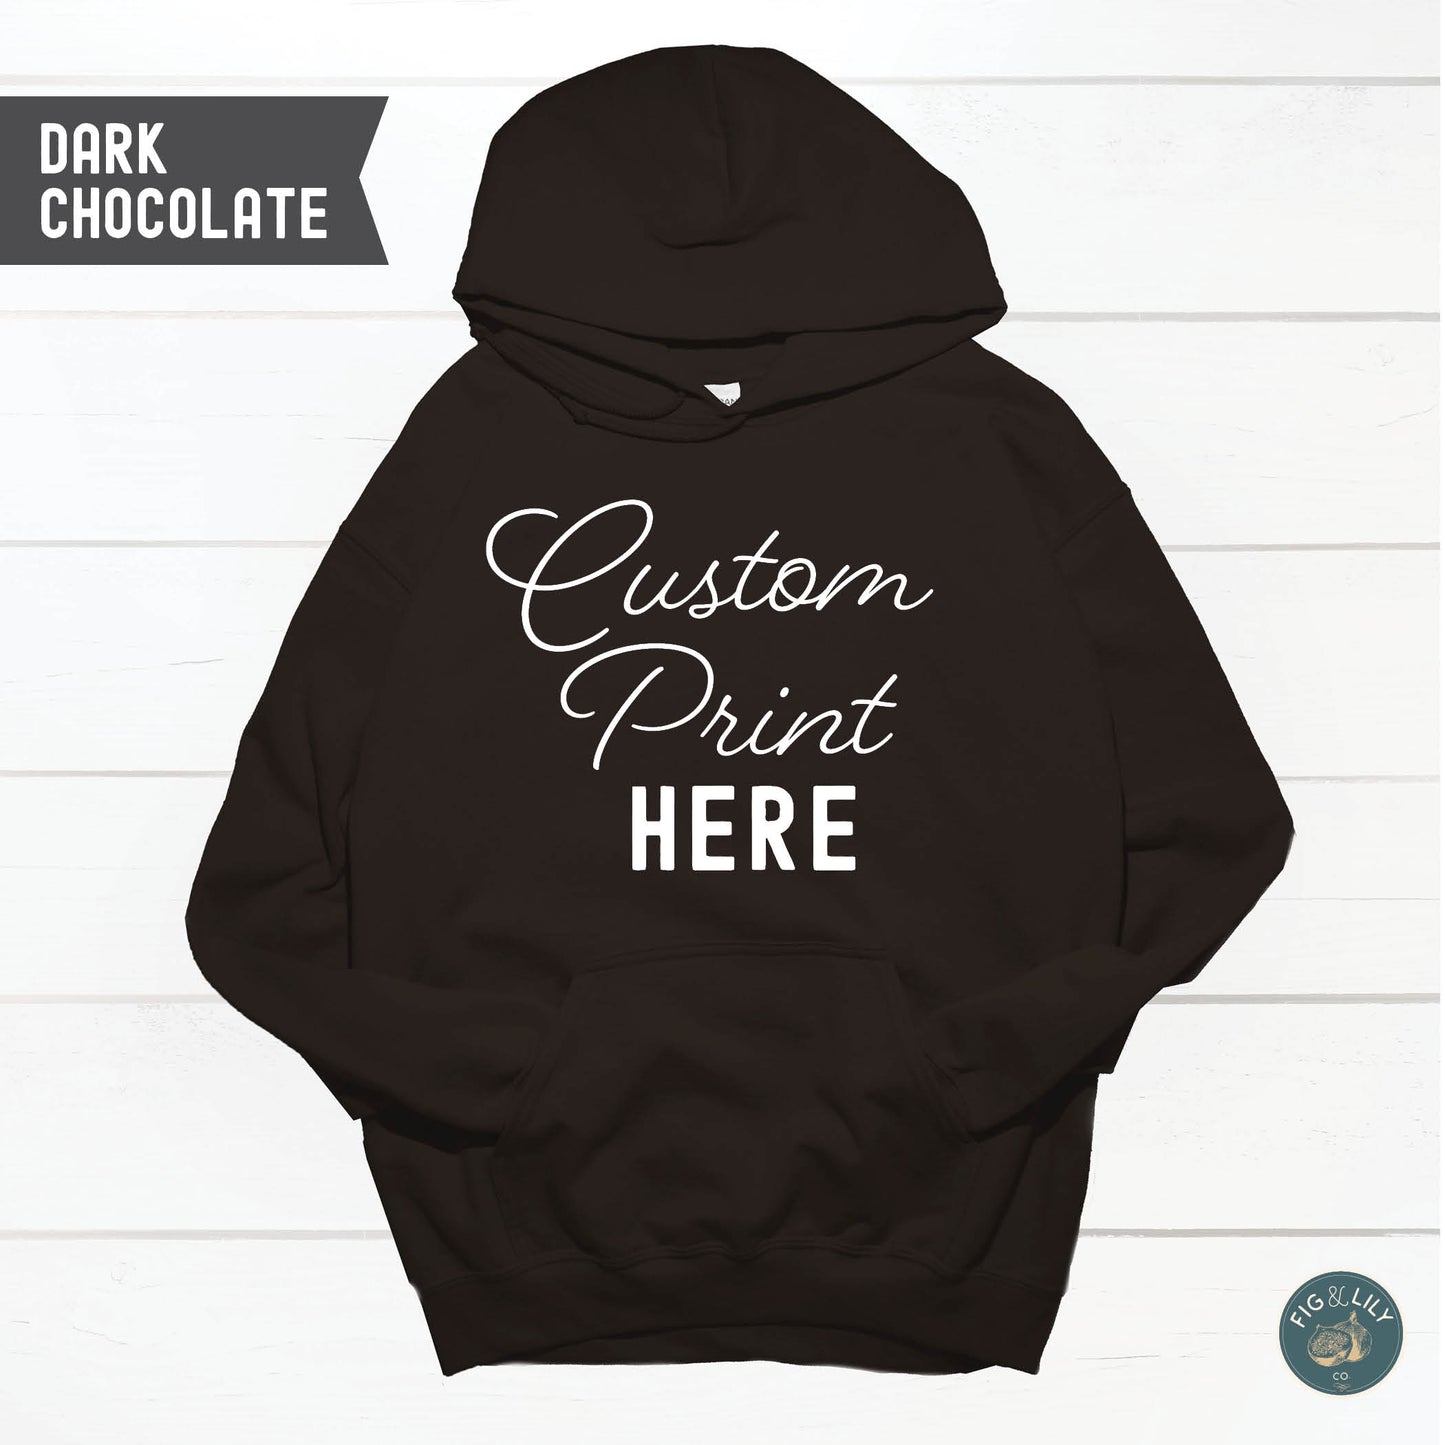 Dark Chocolate Brown Unisex Hoodie, Custom Printed sweatshirt Design, Your Design Here, Personalized Design created just for you, digital proof approval included